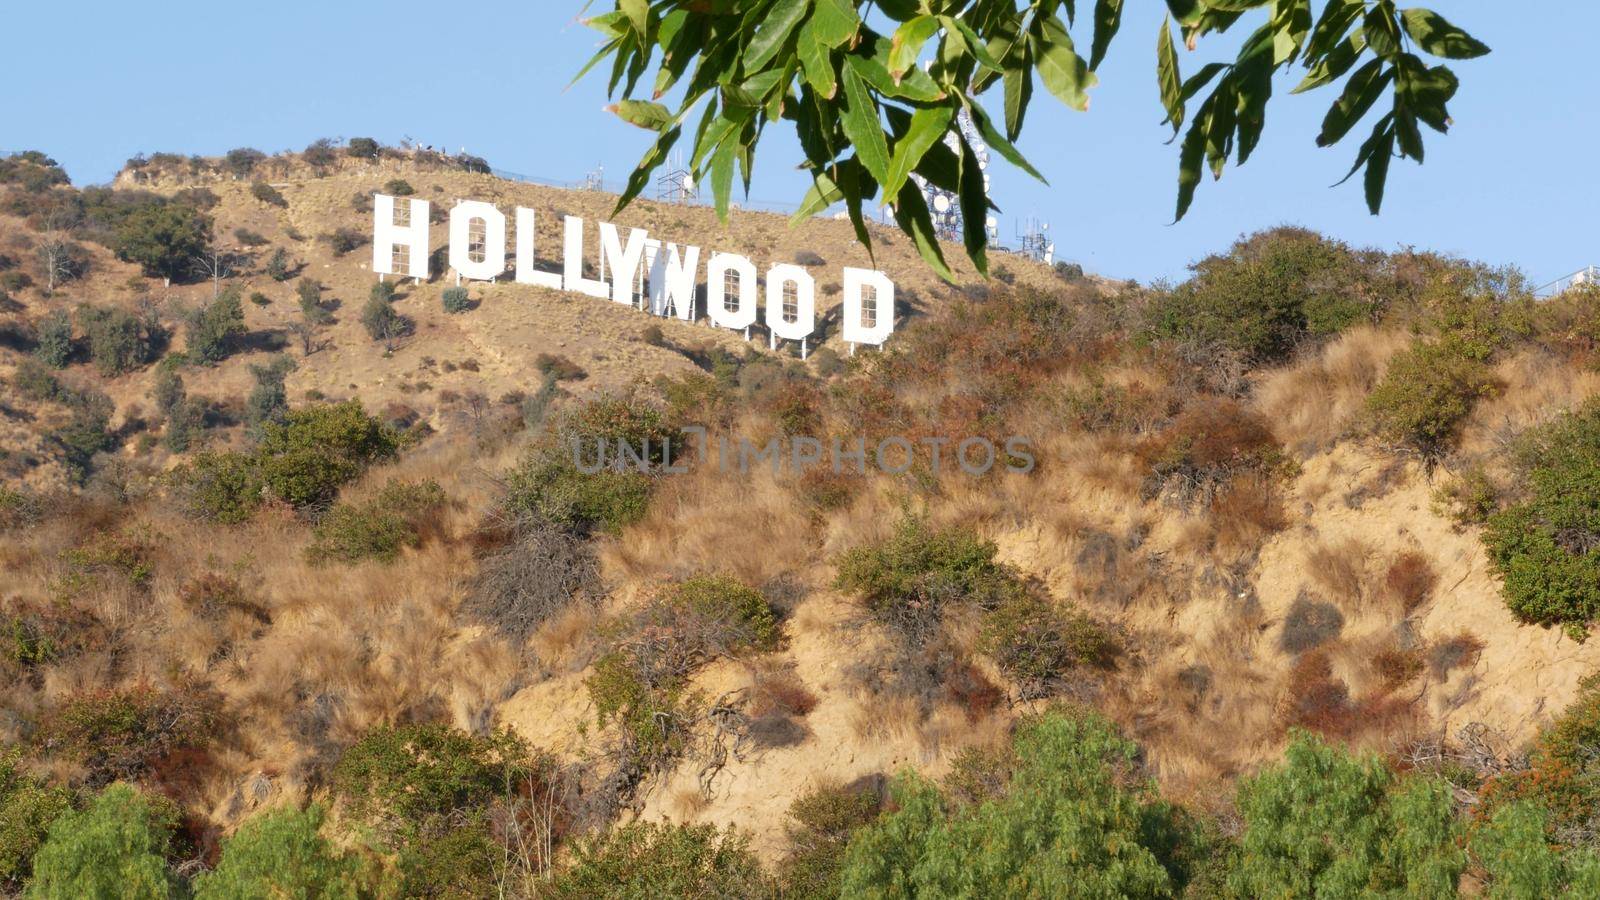 LOS ANGELES, CALIFORNIA, USA - 7 NOV 2019: Iconic Hollywood sign. Big letters on hills as symbol of cinema, movie studios and entertainment industry. Large text on mountain, view thru green leaves by DogoraSun